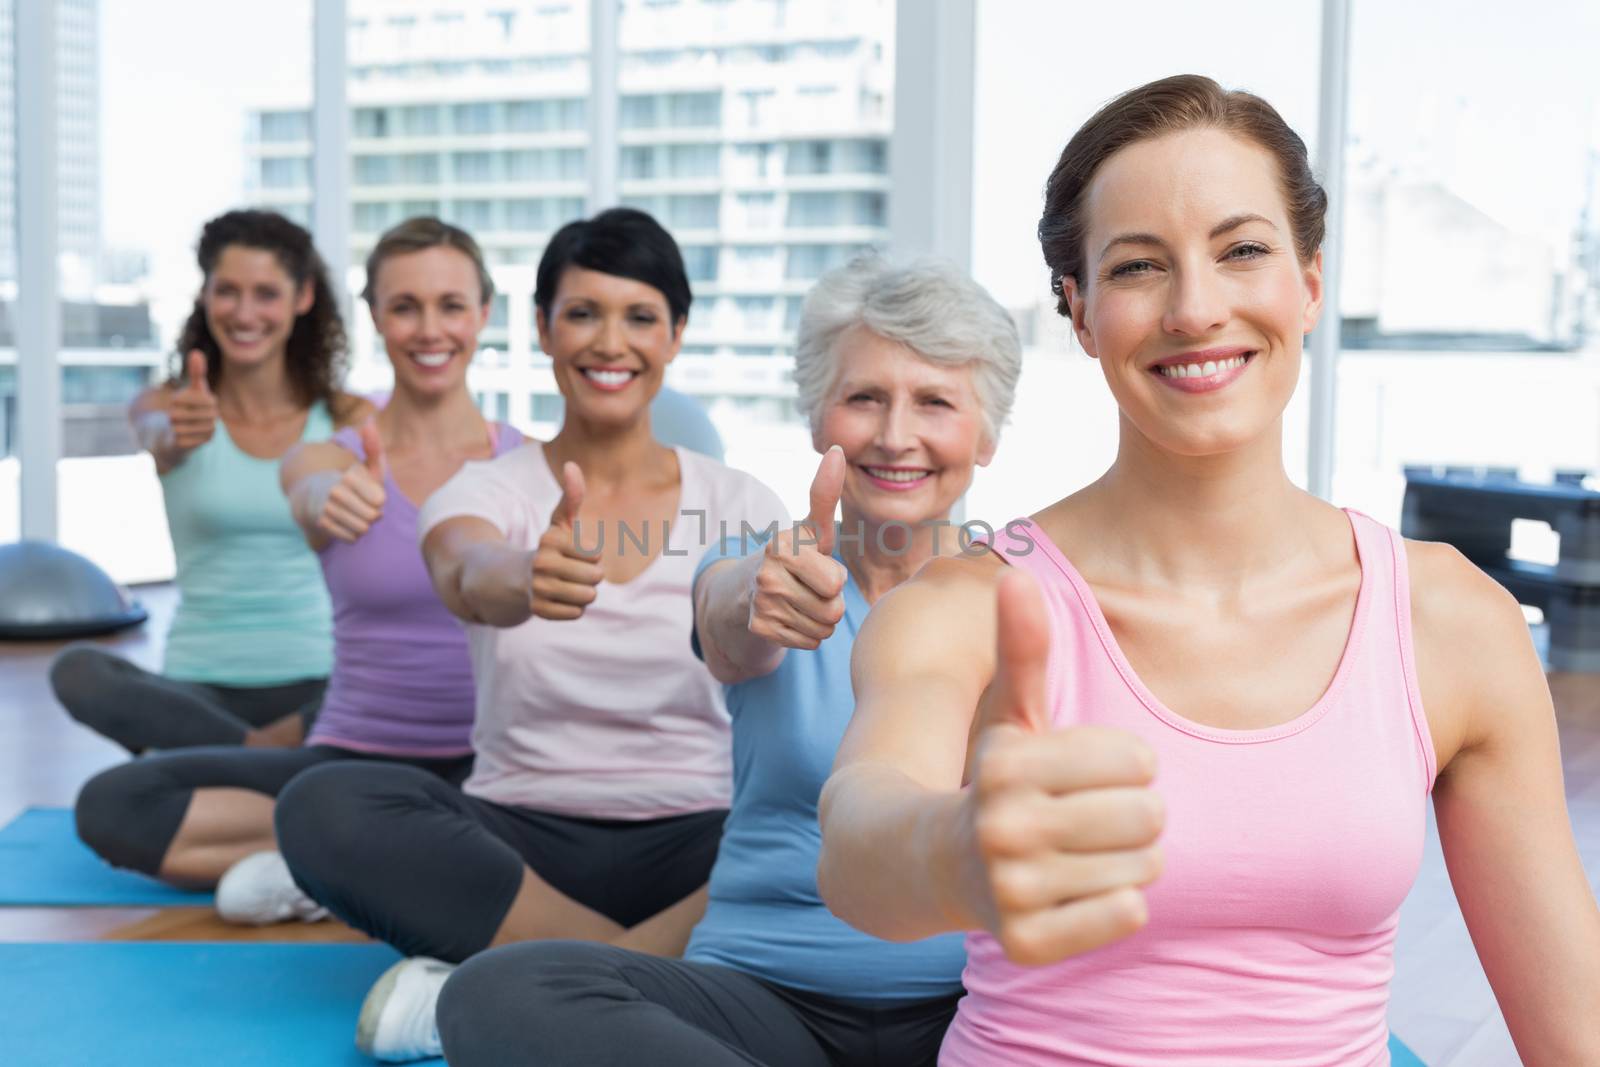 Women gesturing thumbs up in the yoga class by Wavebreakmedia